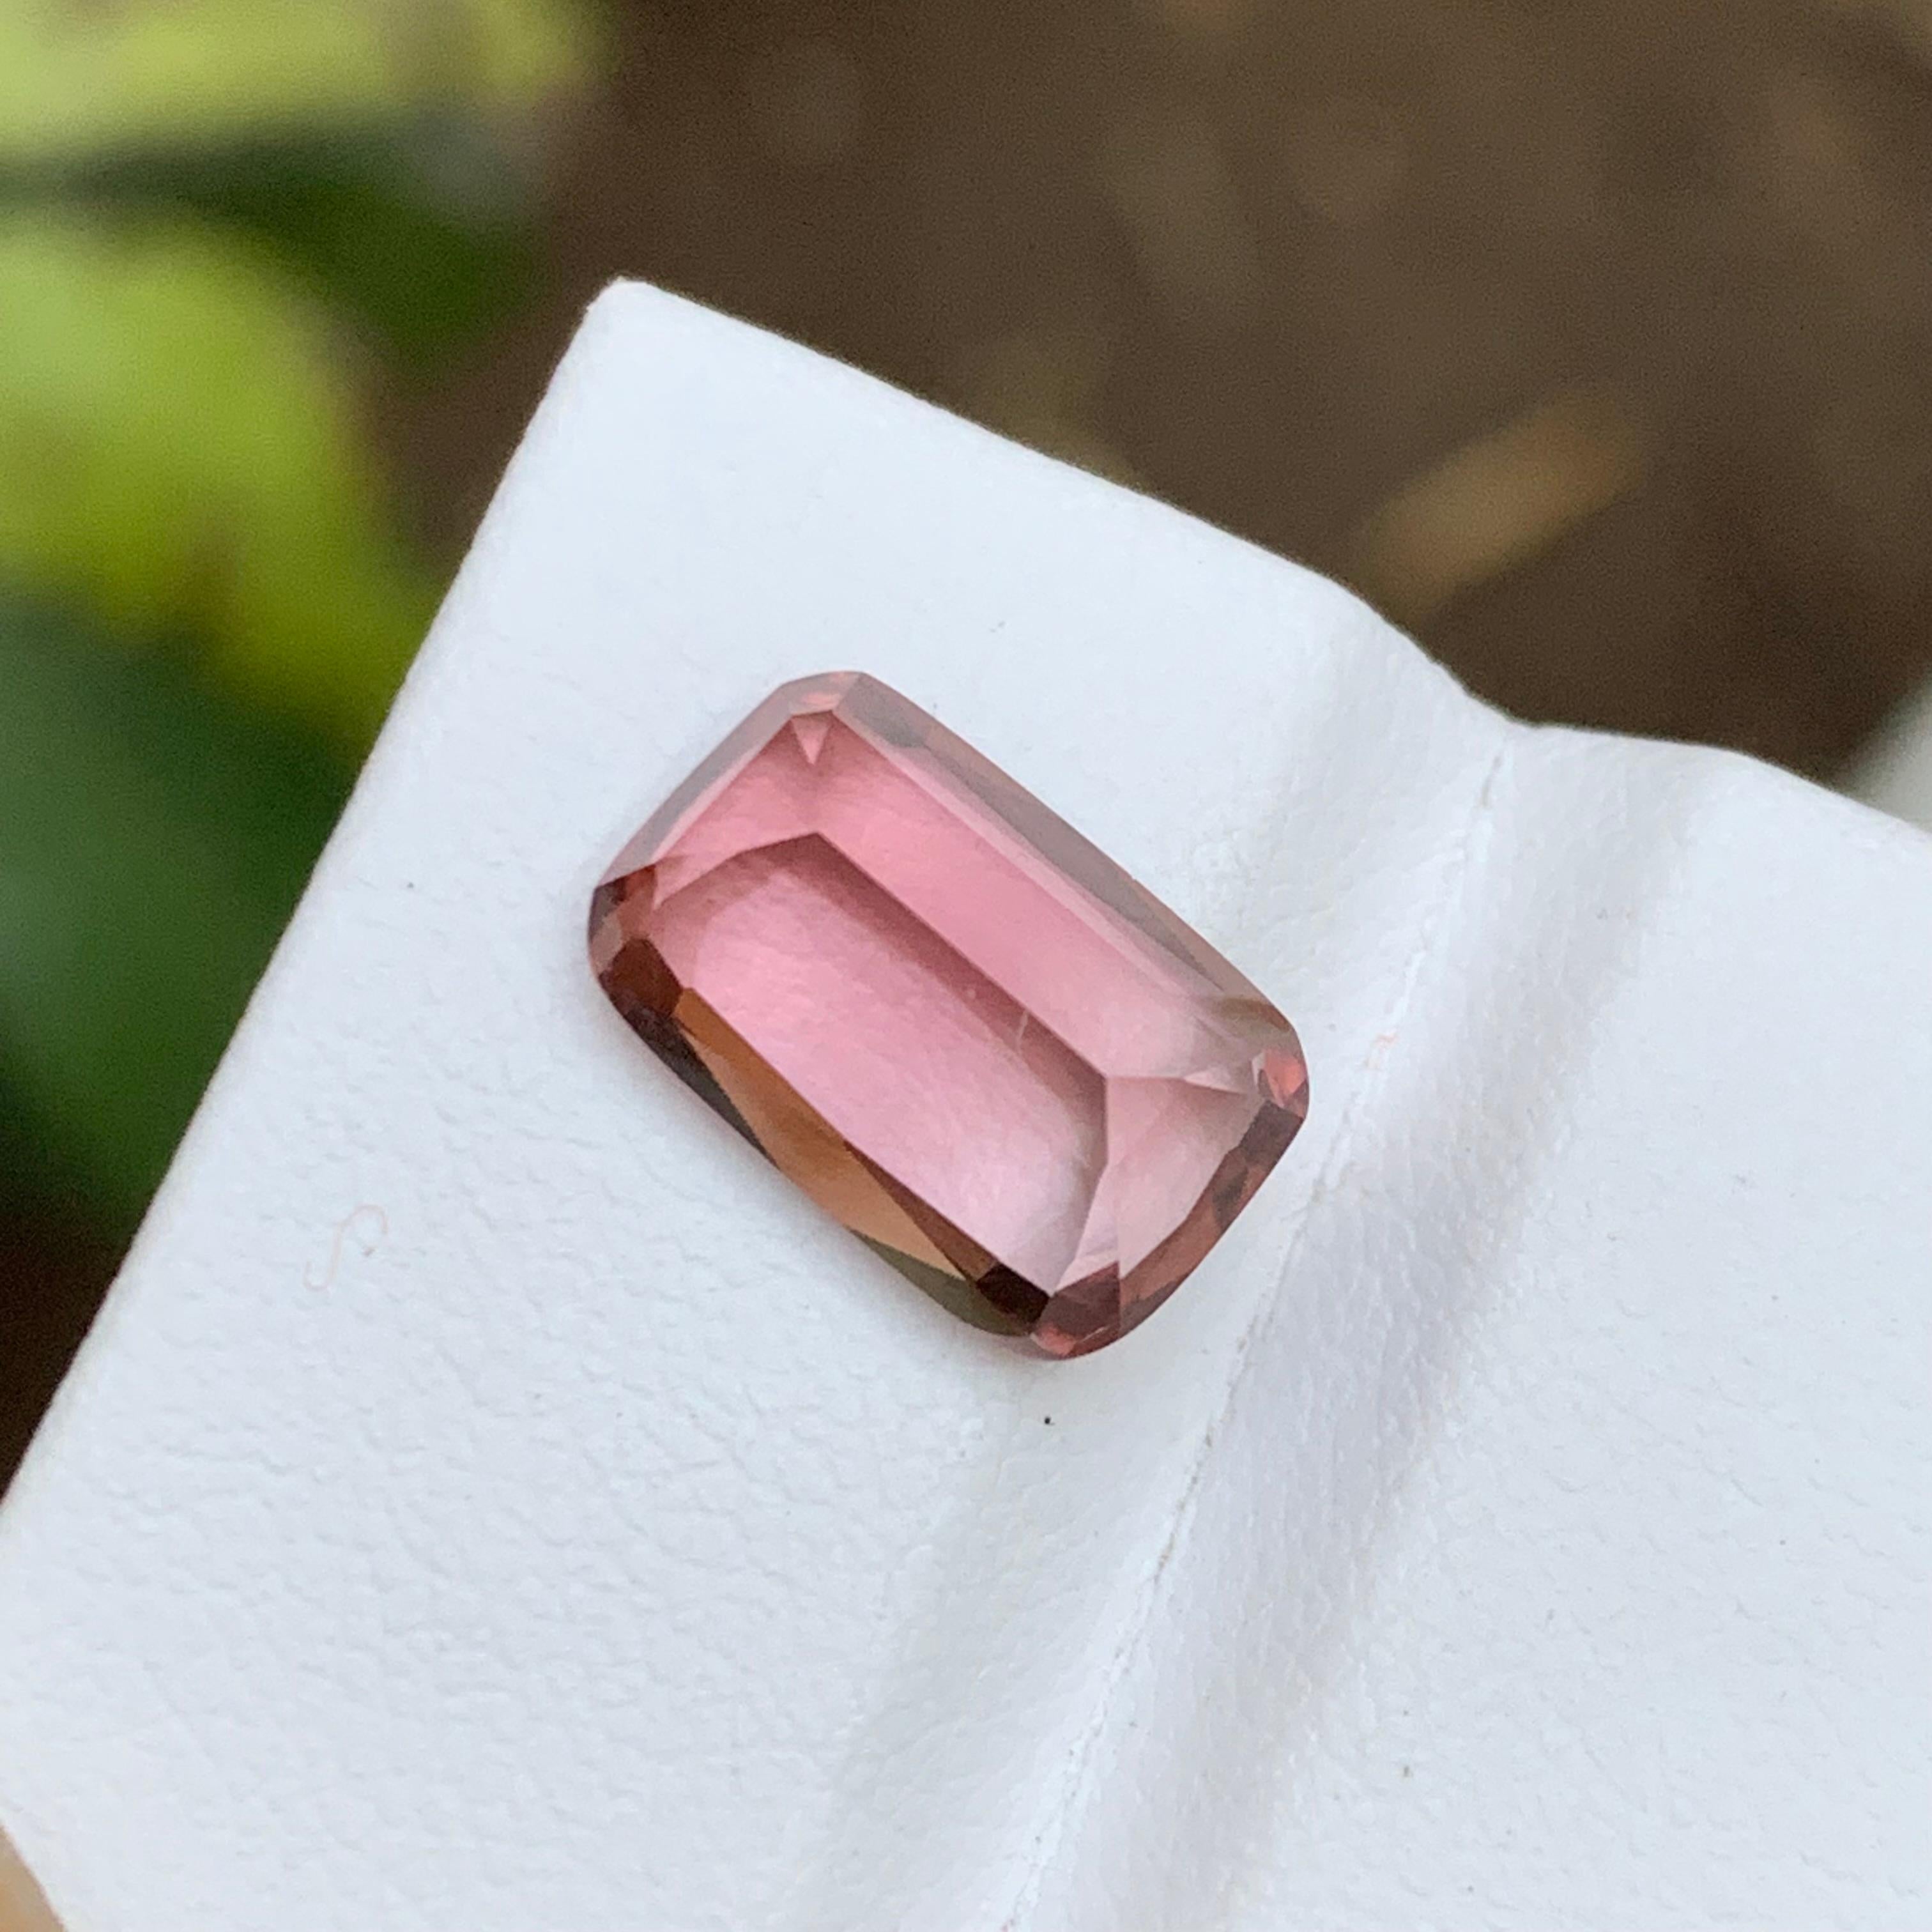 Rare Pink Natural Tourmaline Gemstone 4Ct Brilliant Cushion Cut for Ring/Pendant For Sale 2